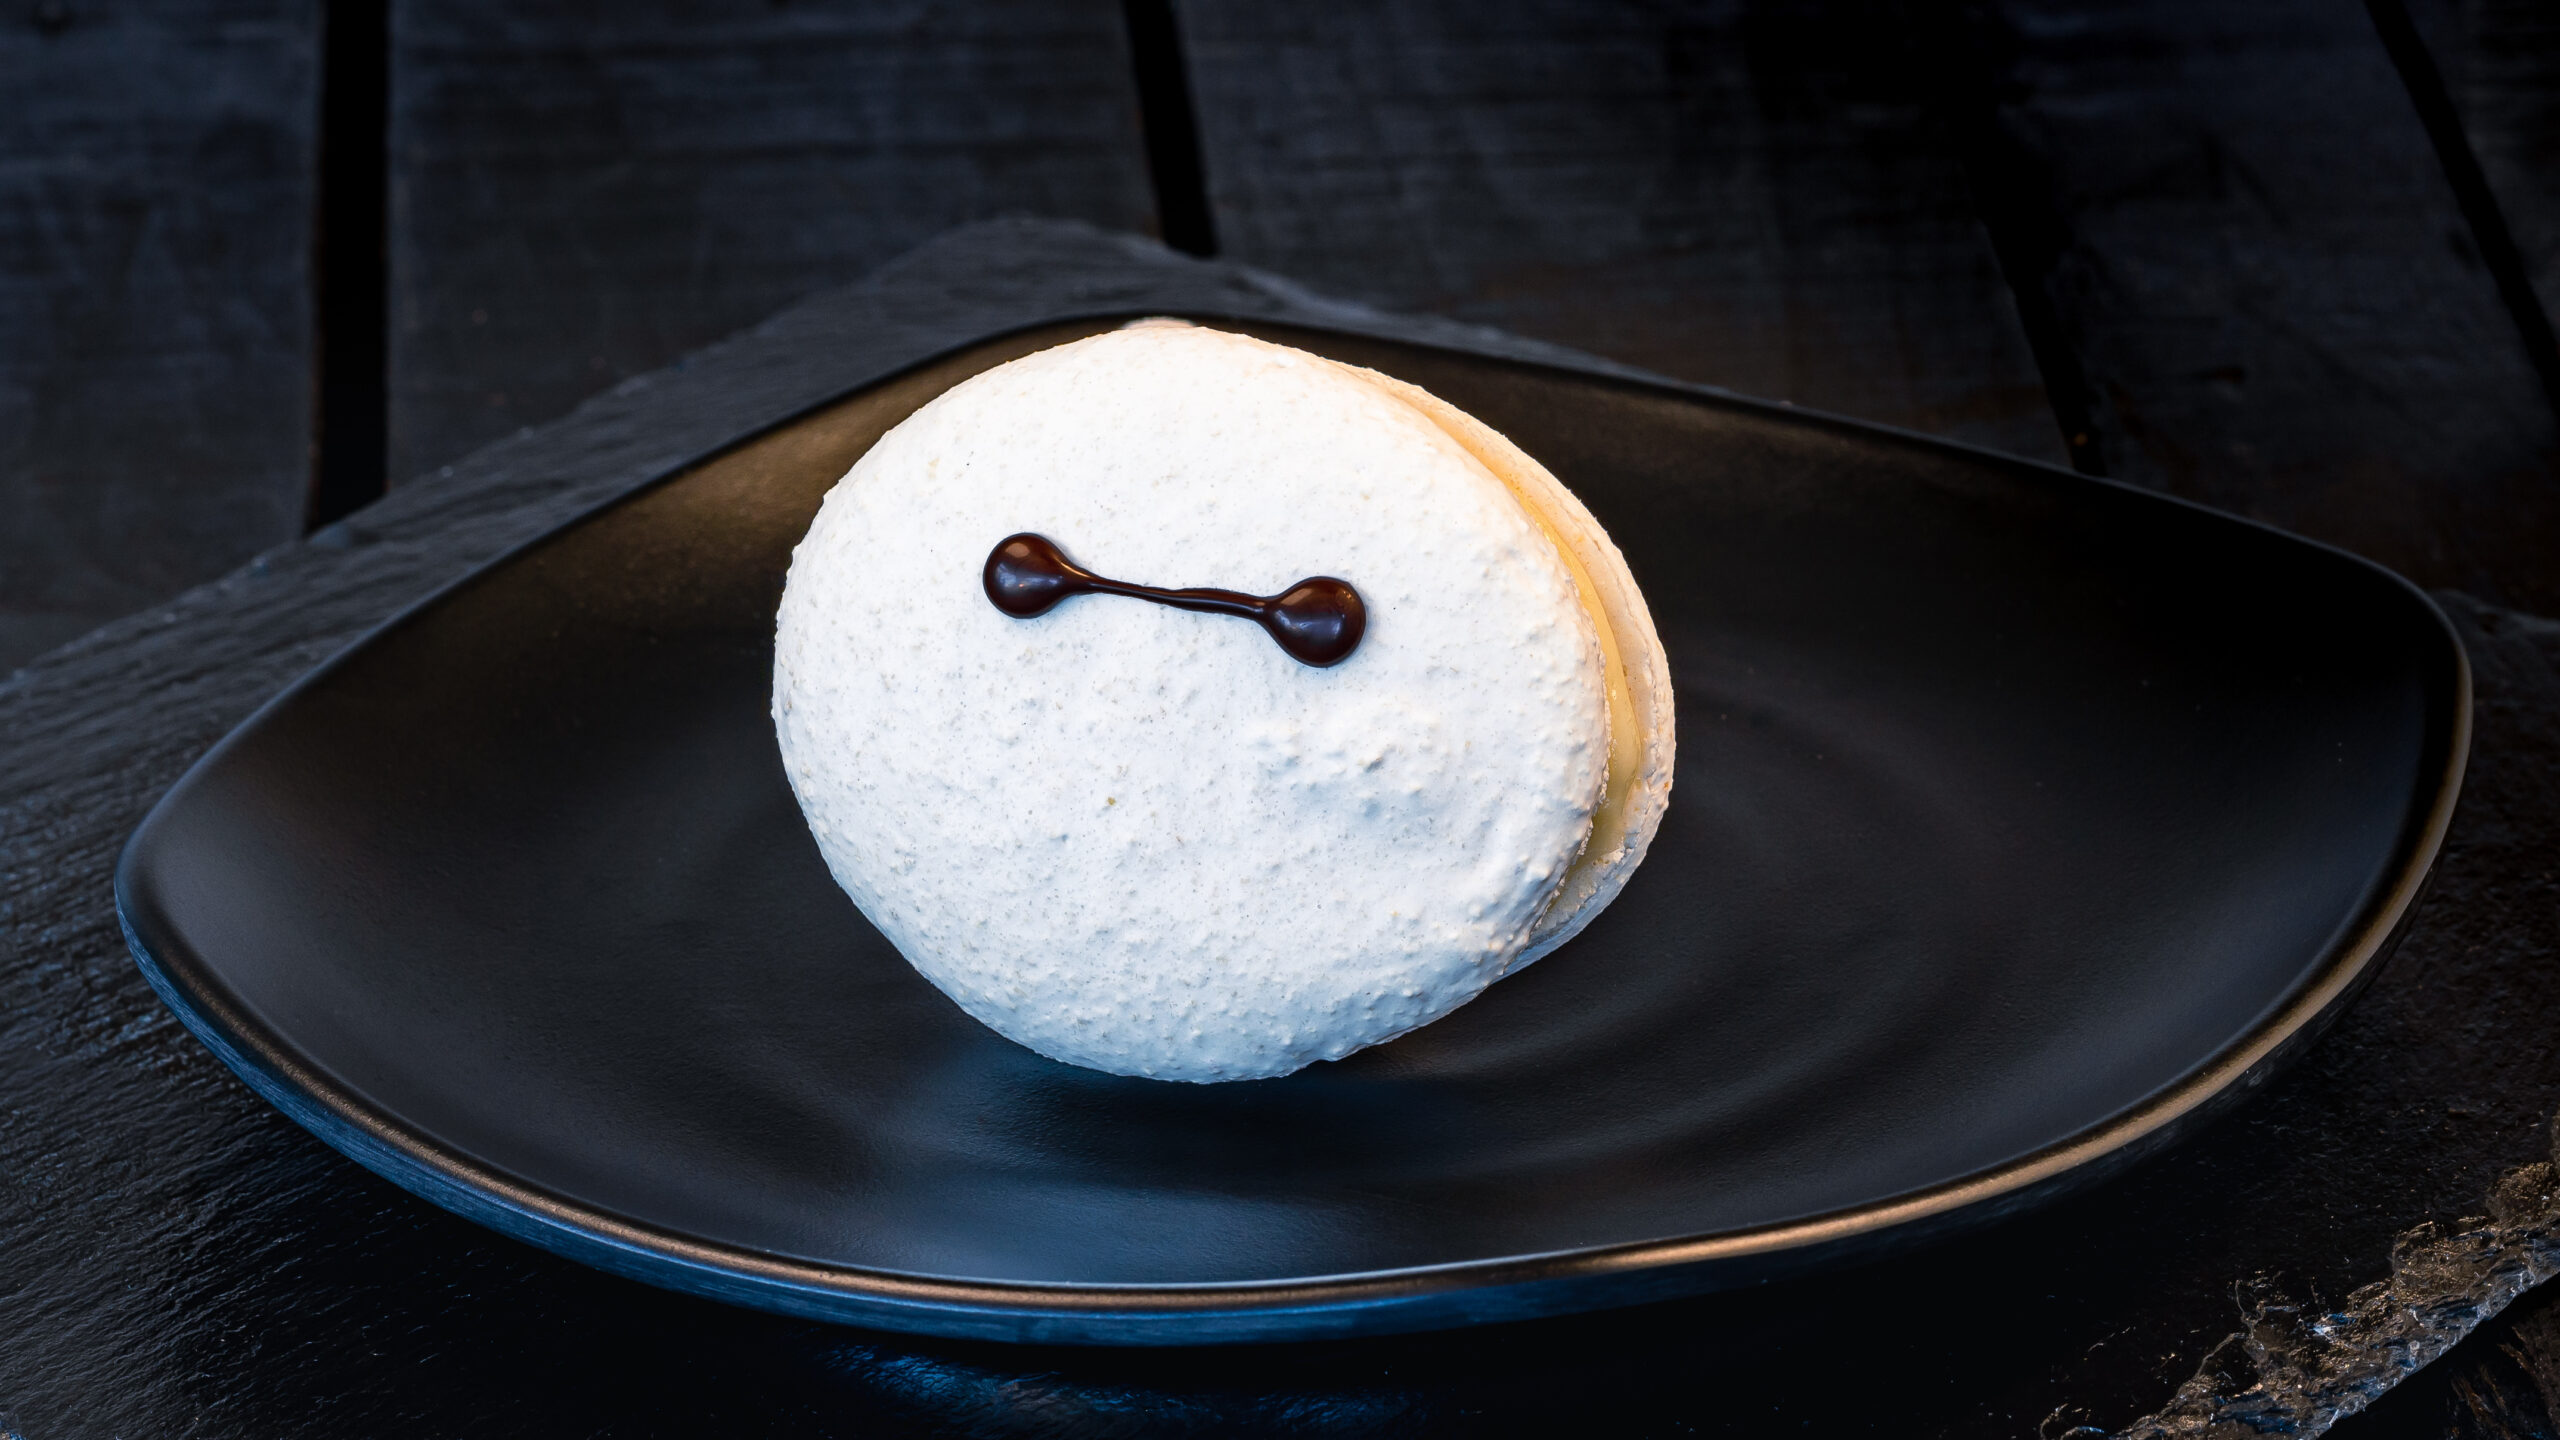 Baymax Macaron (Lucky Fortune Cookery) – filled with chocolate-hazelnut spread and buttercream. Available beginning July 19, 2023. For more details, visit DisneyParksBlog.com. (David Nguyen/Disneyland Resort)